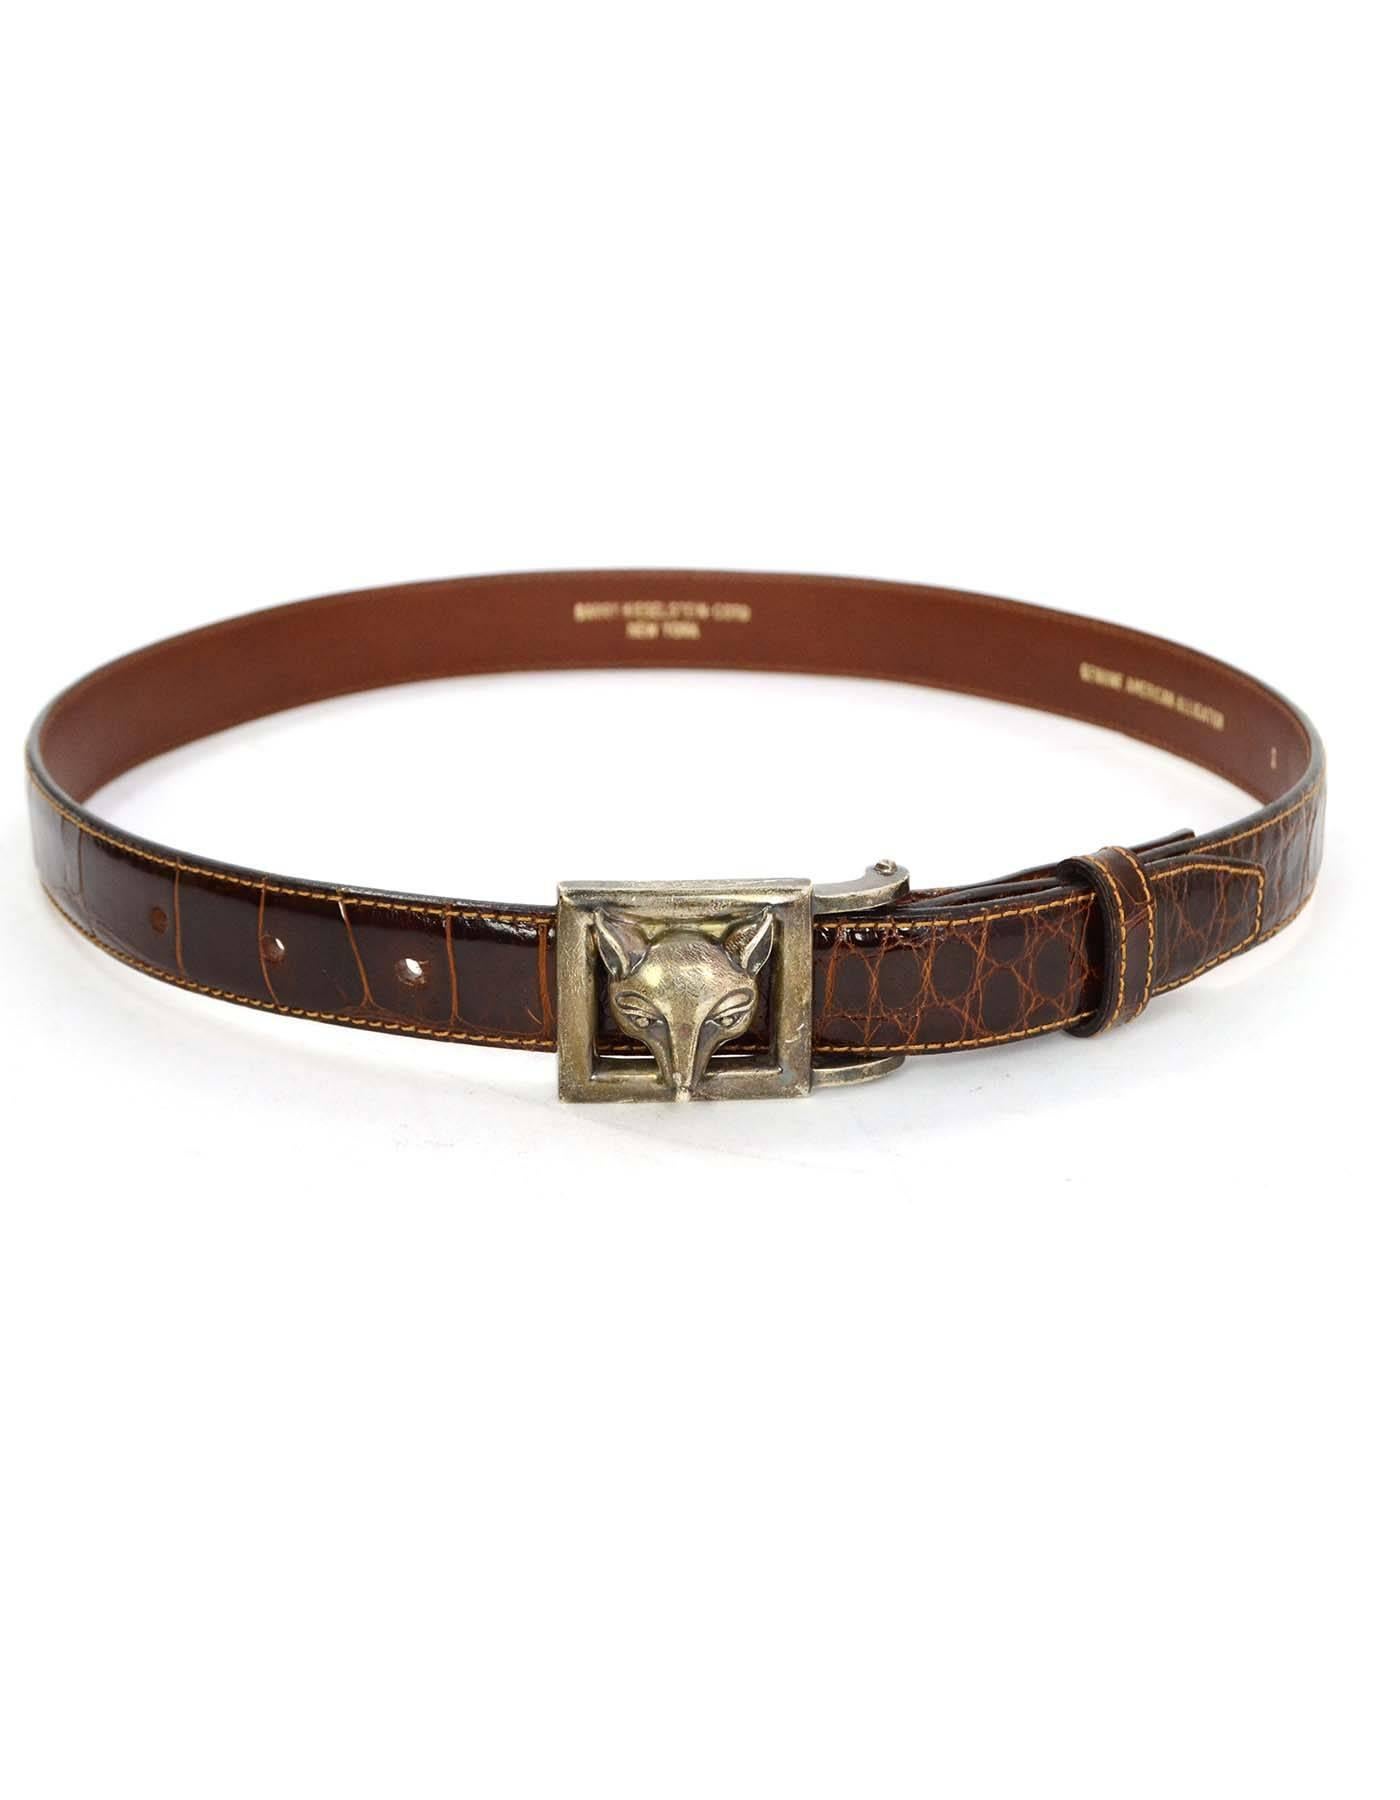 Kieselstein-Cord Alligator Skin Belt Strap
**Note: Does NOT include belt buckle**
Color: Brown
Hardware: Brown and silvertone
Materials: Alligator skin and leather
Closure/Opening: Double snap button closure
Stamp: Barry Kieselstein-Cord New